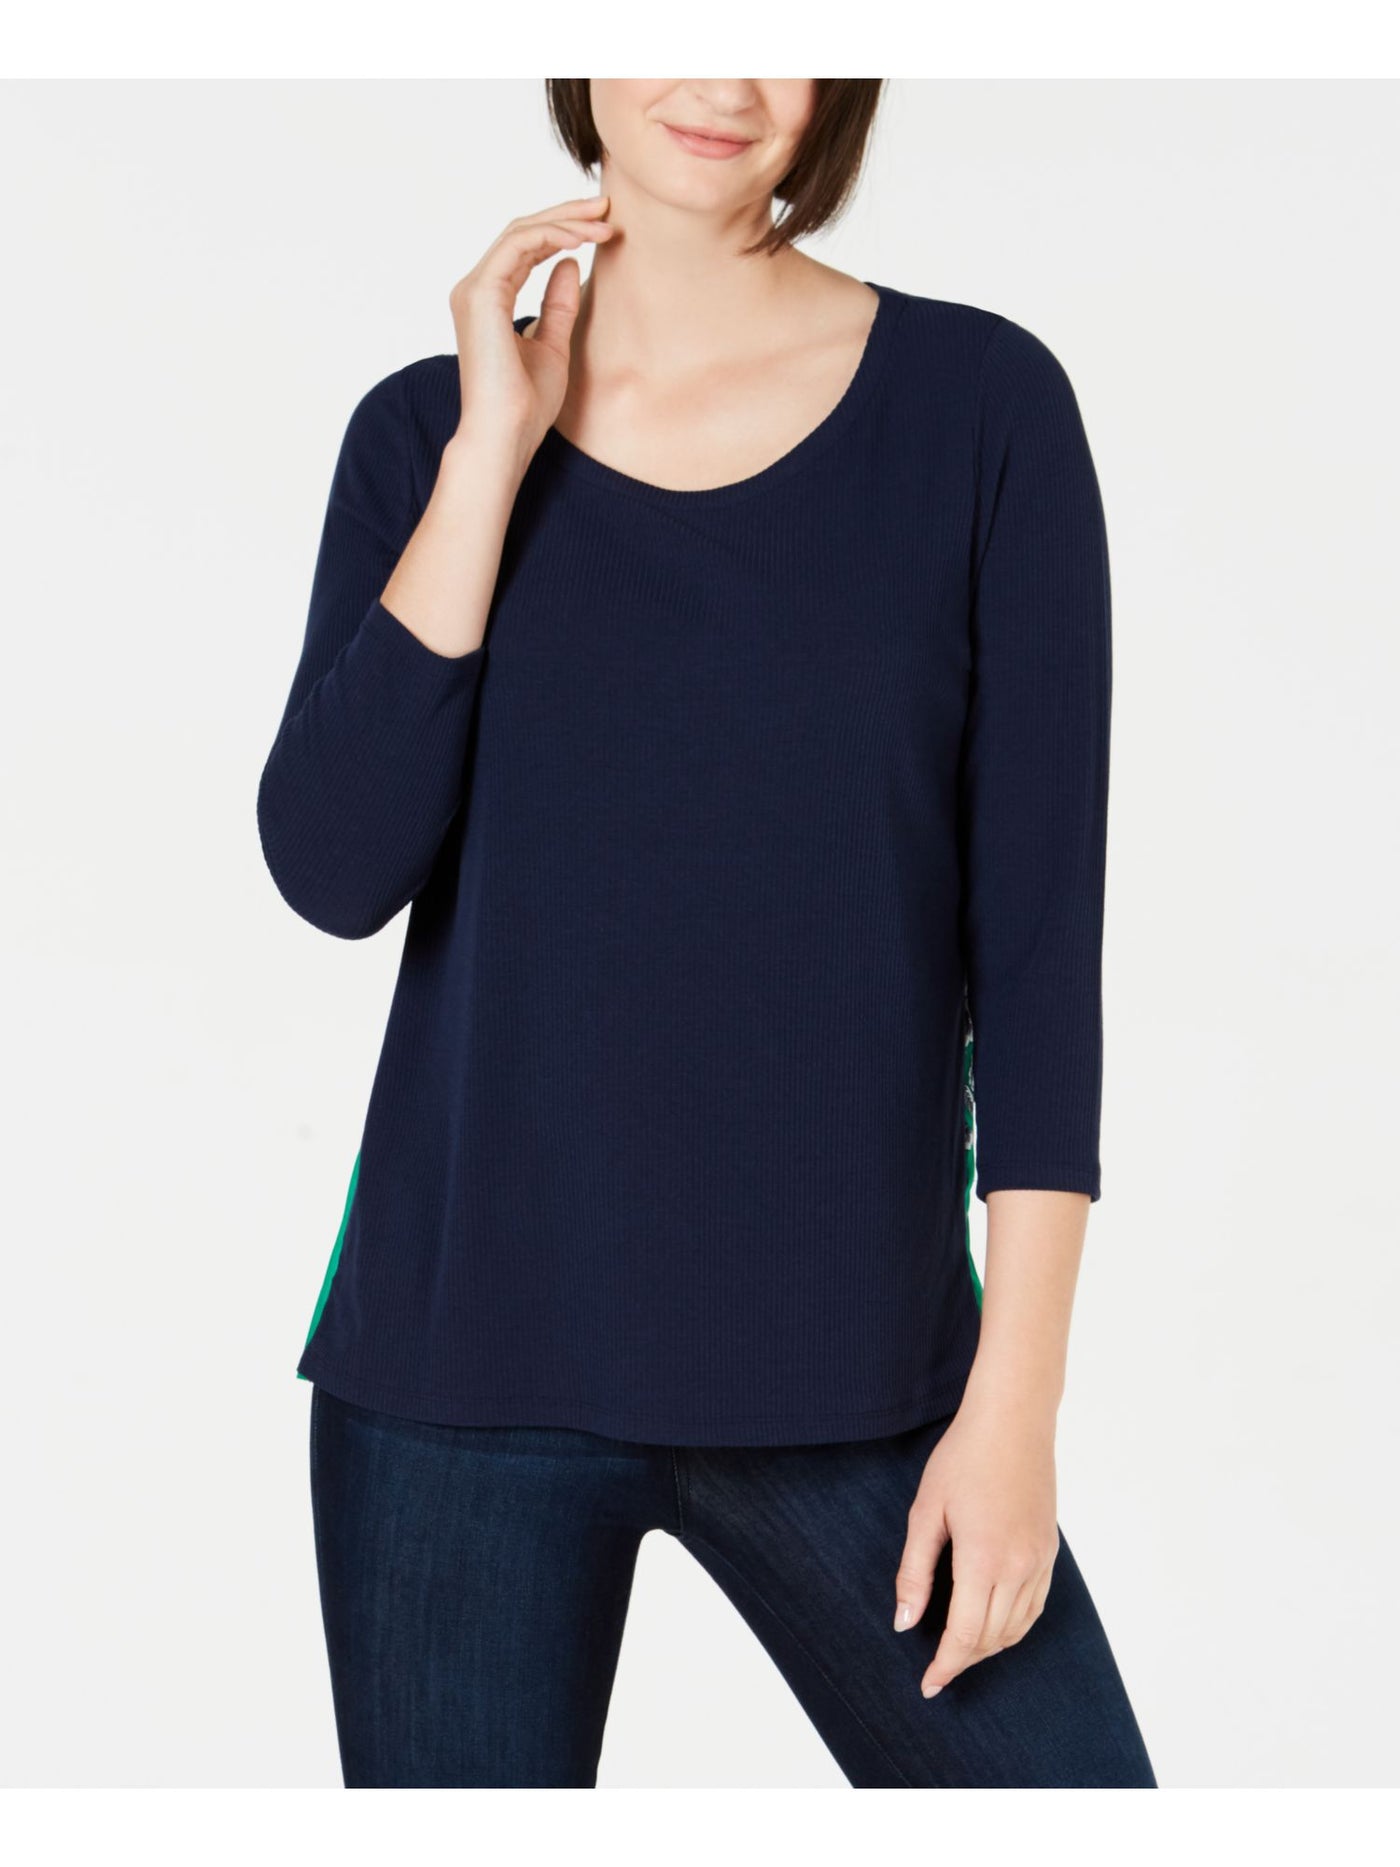 CHARTER CLUB Womens Navy Stretch Contrast Pleated-back Long Sleeve Scoop Neck Top XL